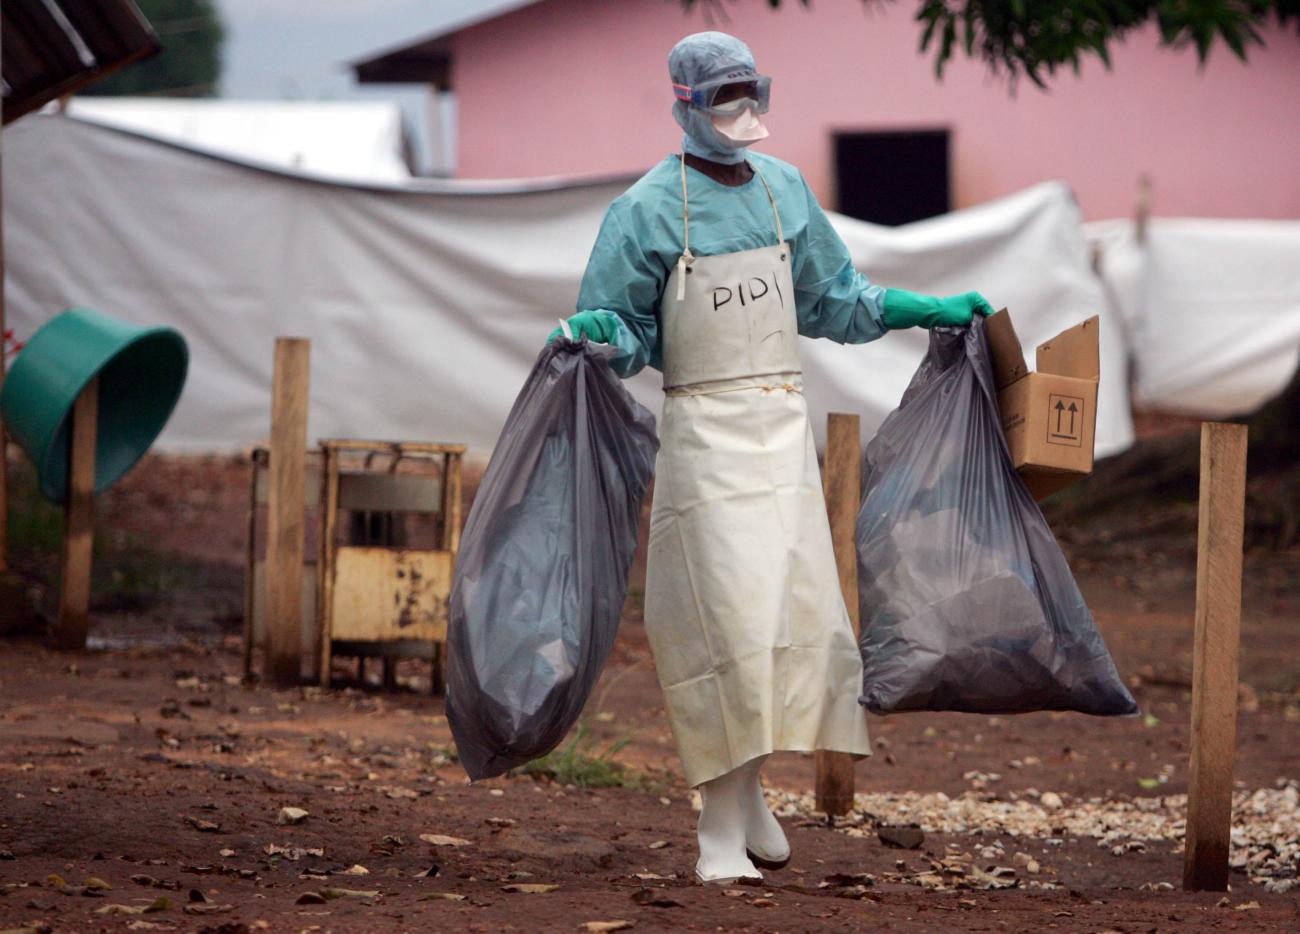 A health worker in protective clothing carries waste for disposal outside the isolation ward for patients with Marburg virus, in Uige, Angola, on April 20, 2005.